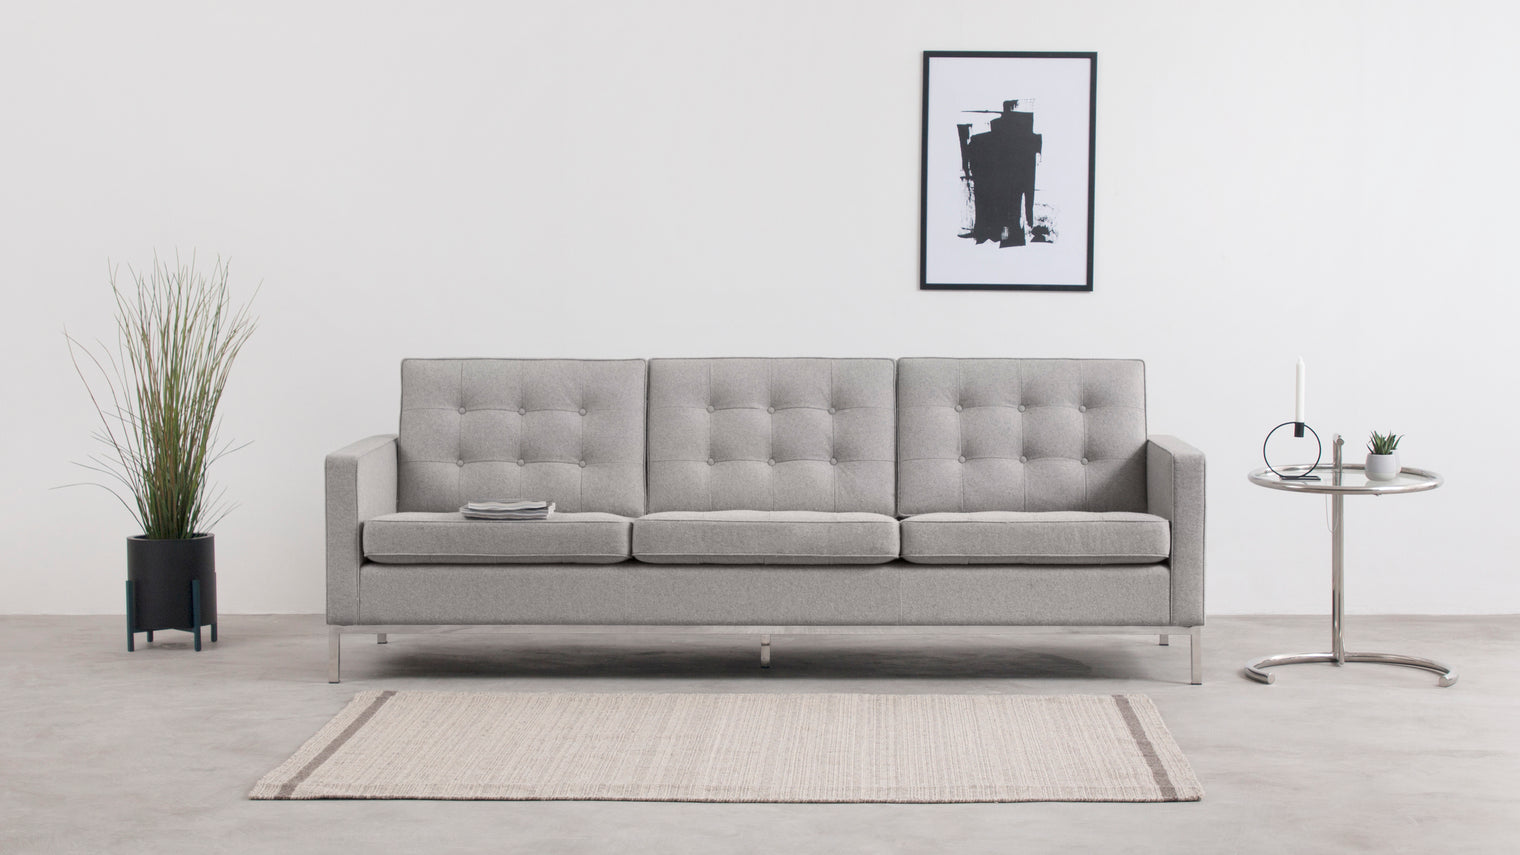 Timeless Modernism | The Florence Sofa embodies the essence of mid-20th-century modernism. Its clean lines, balanced proportions, and meticulous attention to detail make it an enduring symbol of design sophistication.
